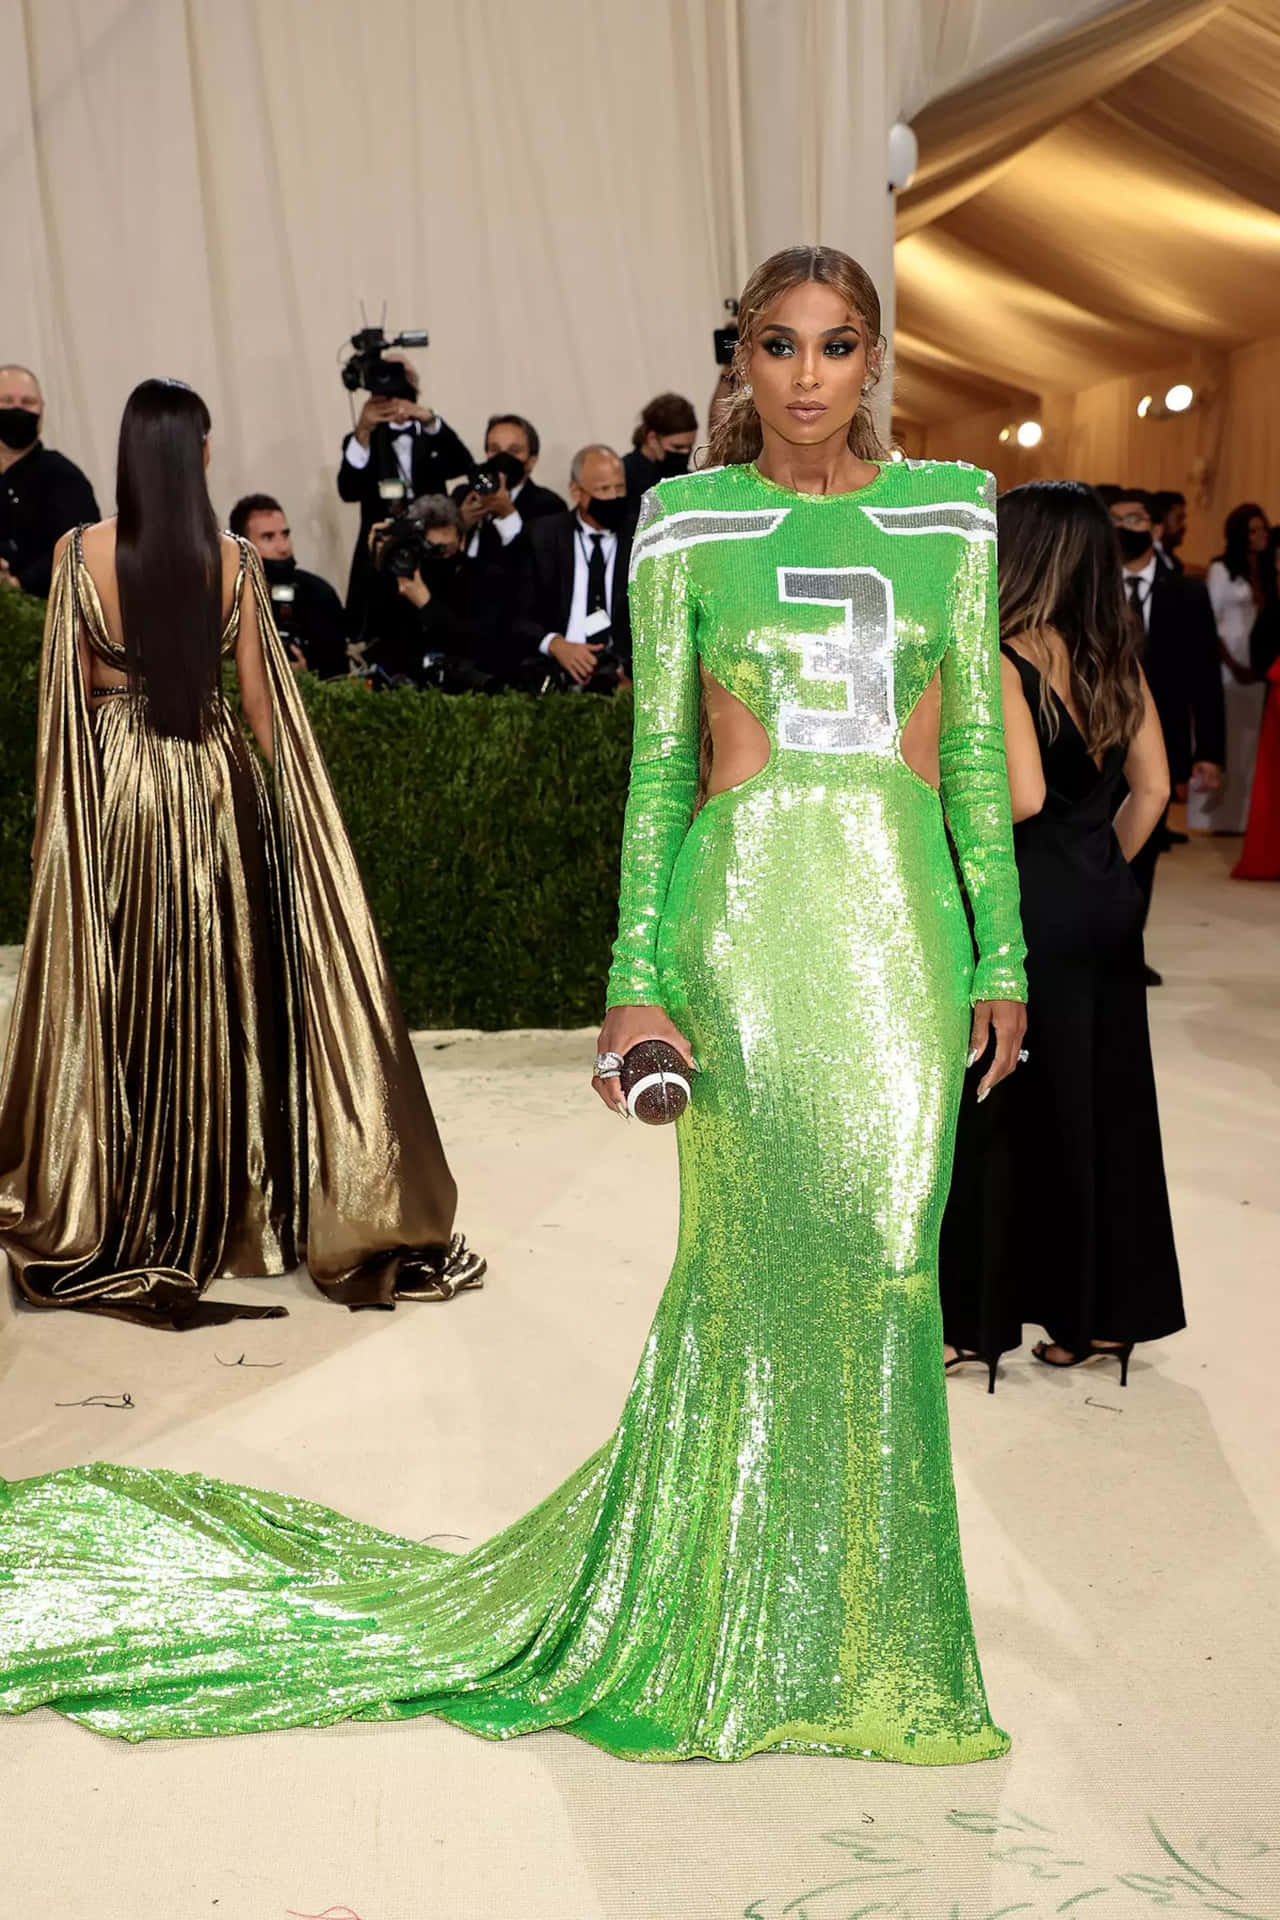 Celebrities shine on the red carpet at the 2021 Met Gala